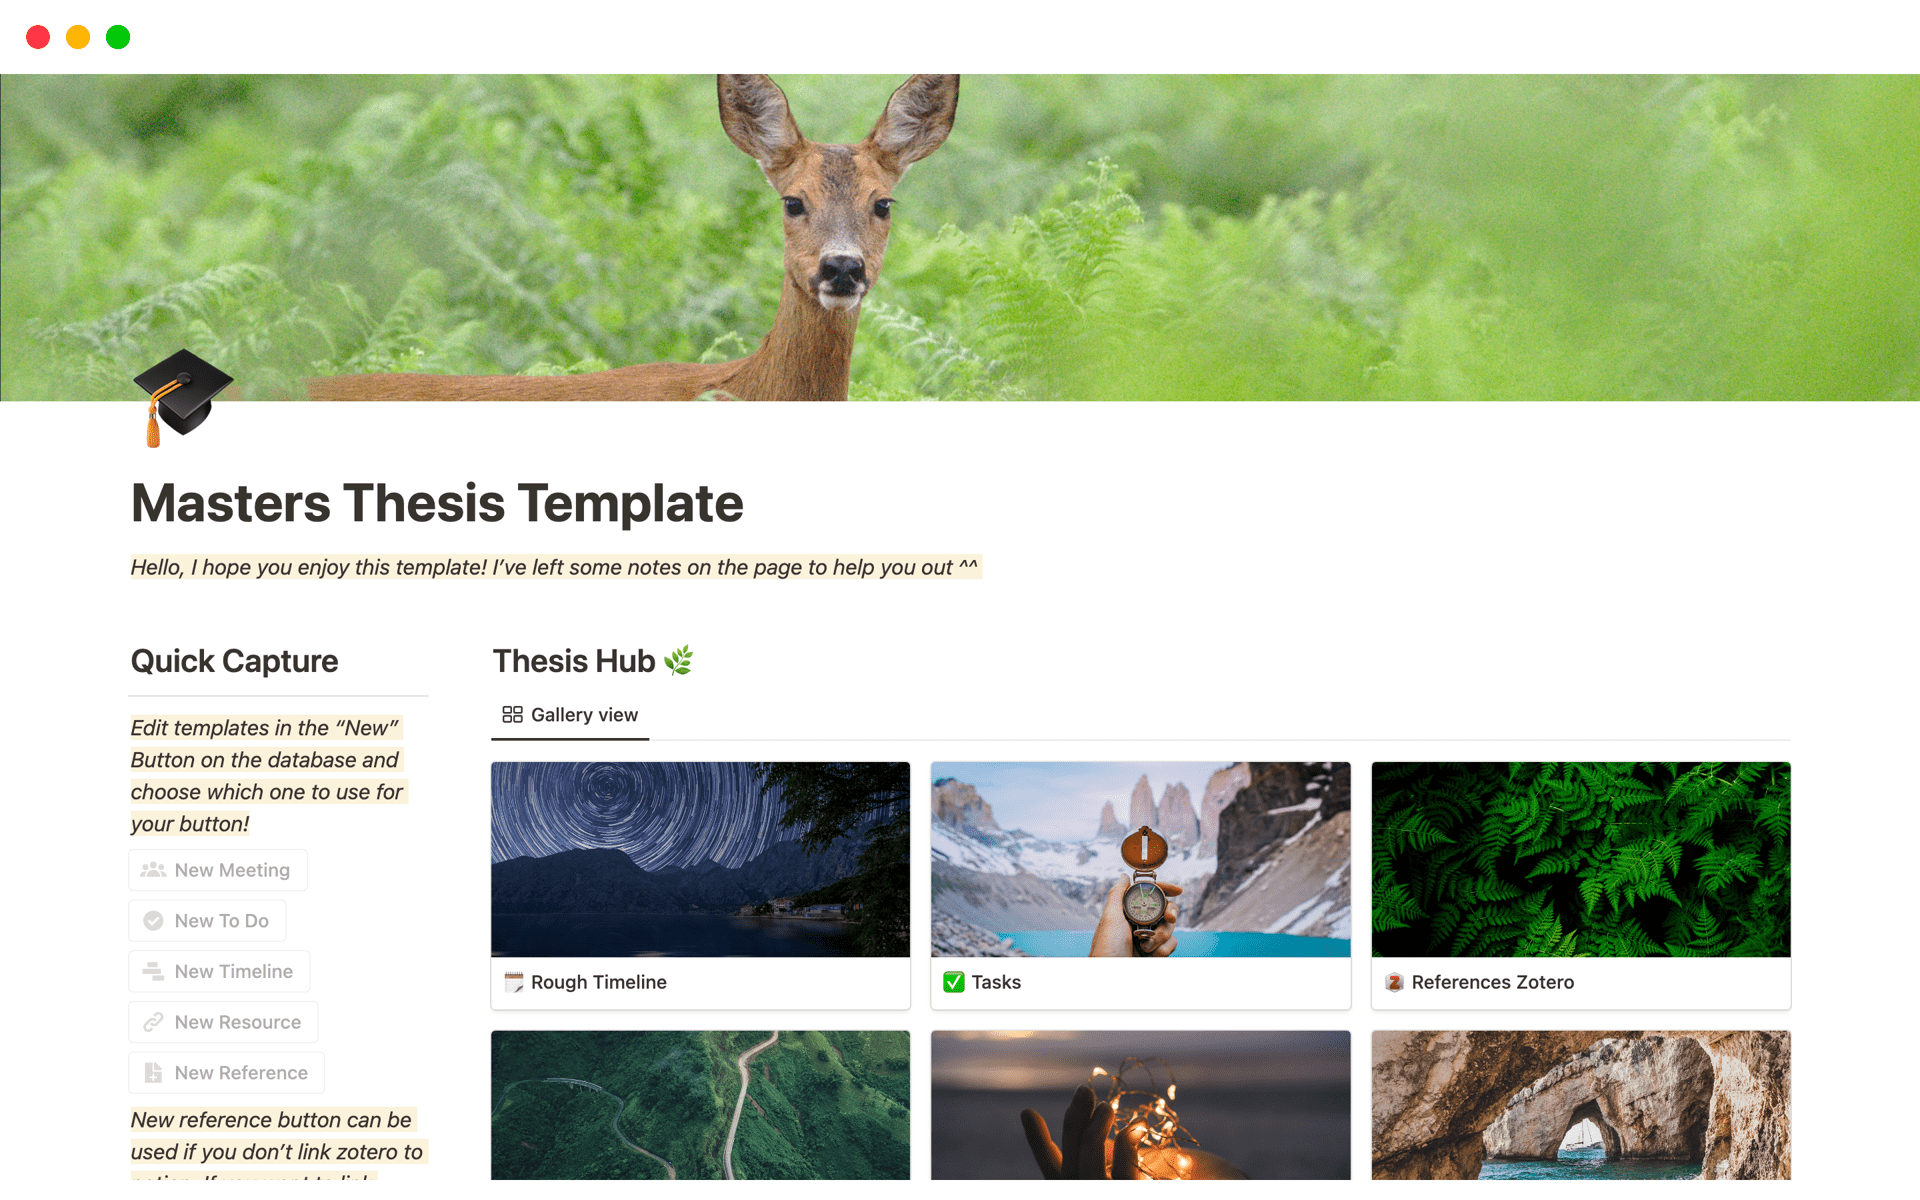 A Notion template for university students writing their thesis! 
Organize your tasks, make a timeline, and have a visual calendar for your thesis!